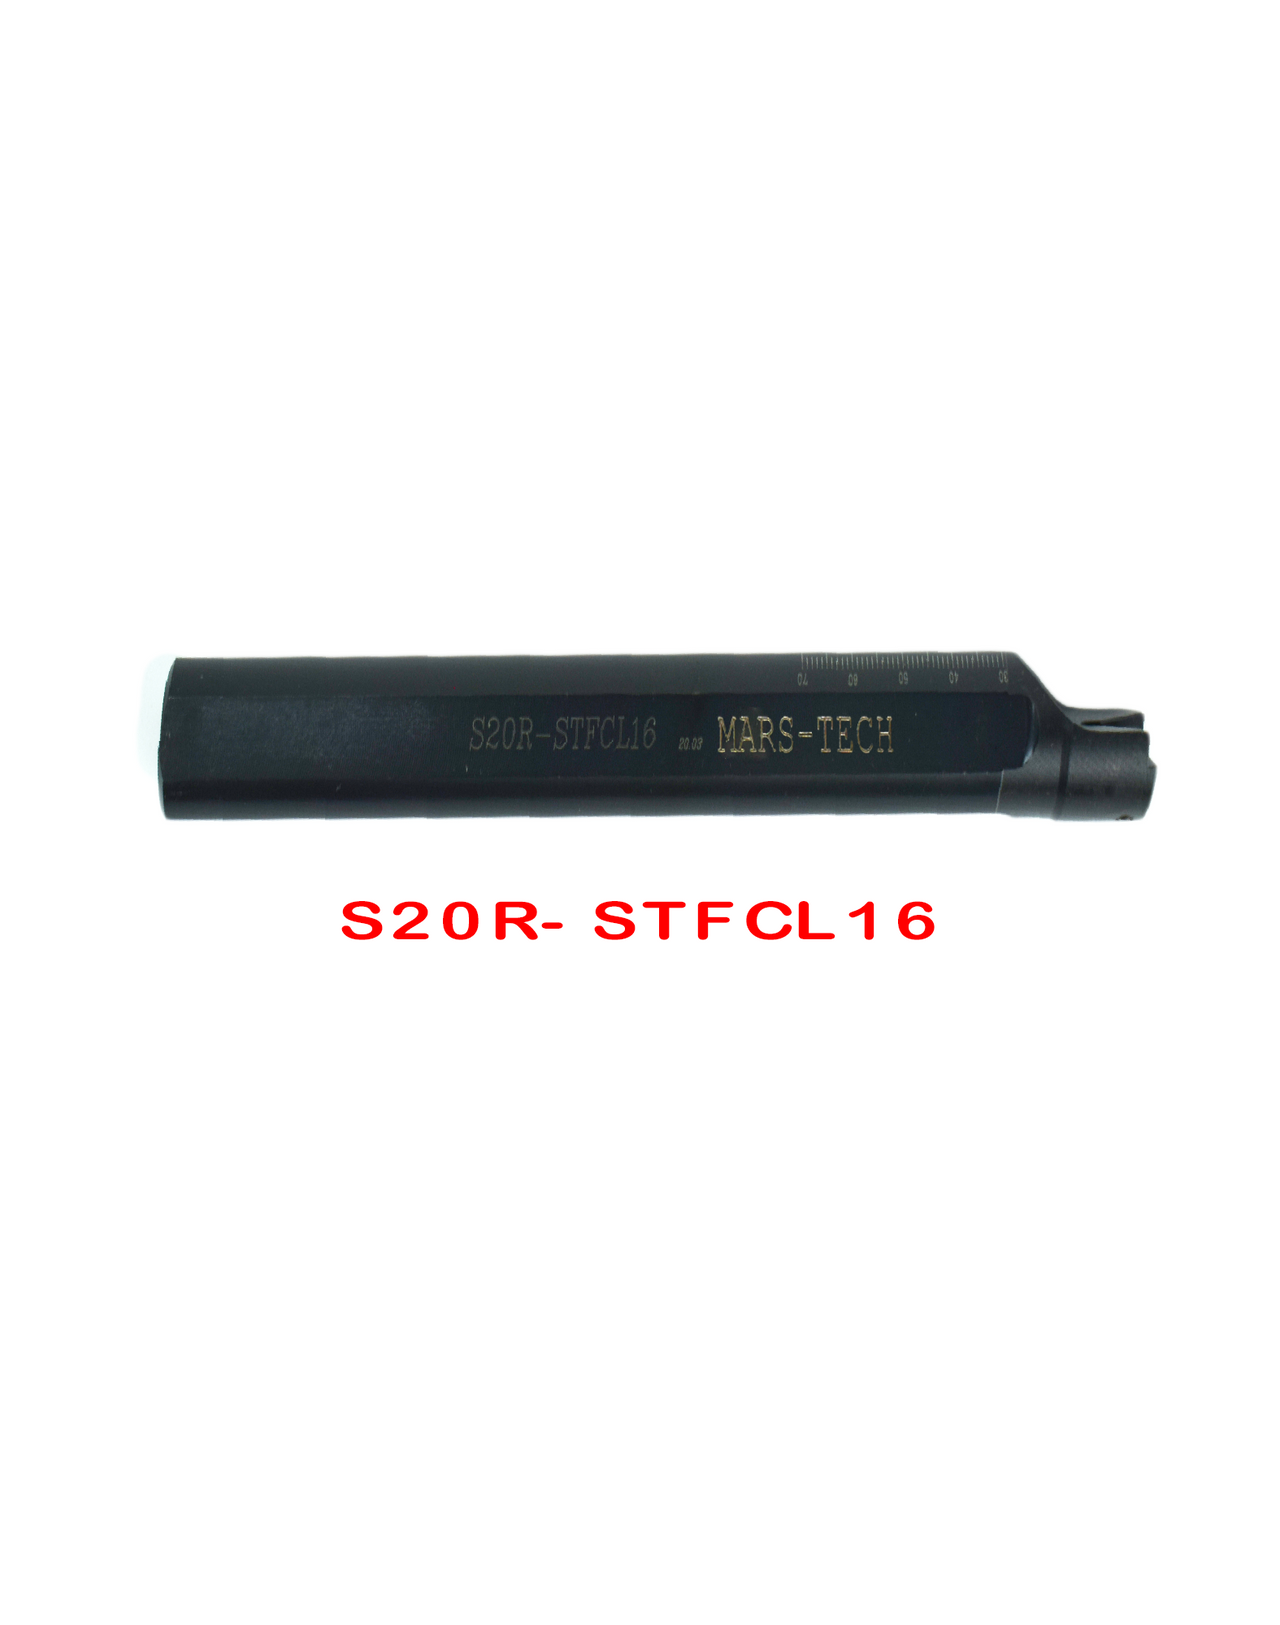 STFCL/R TCMT16 Boring Bar dia 16/20/25 pack of 1